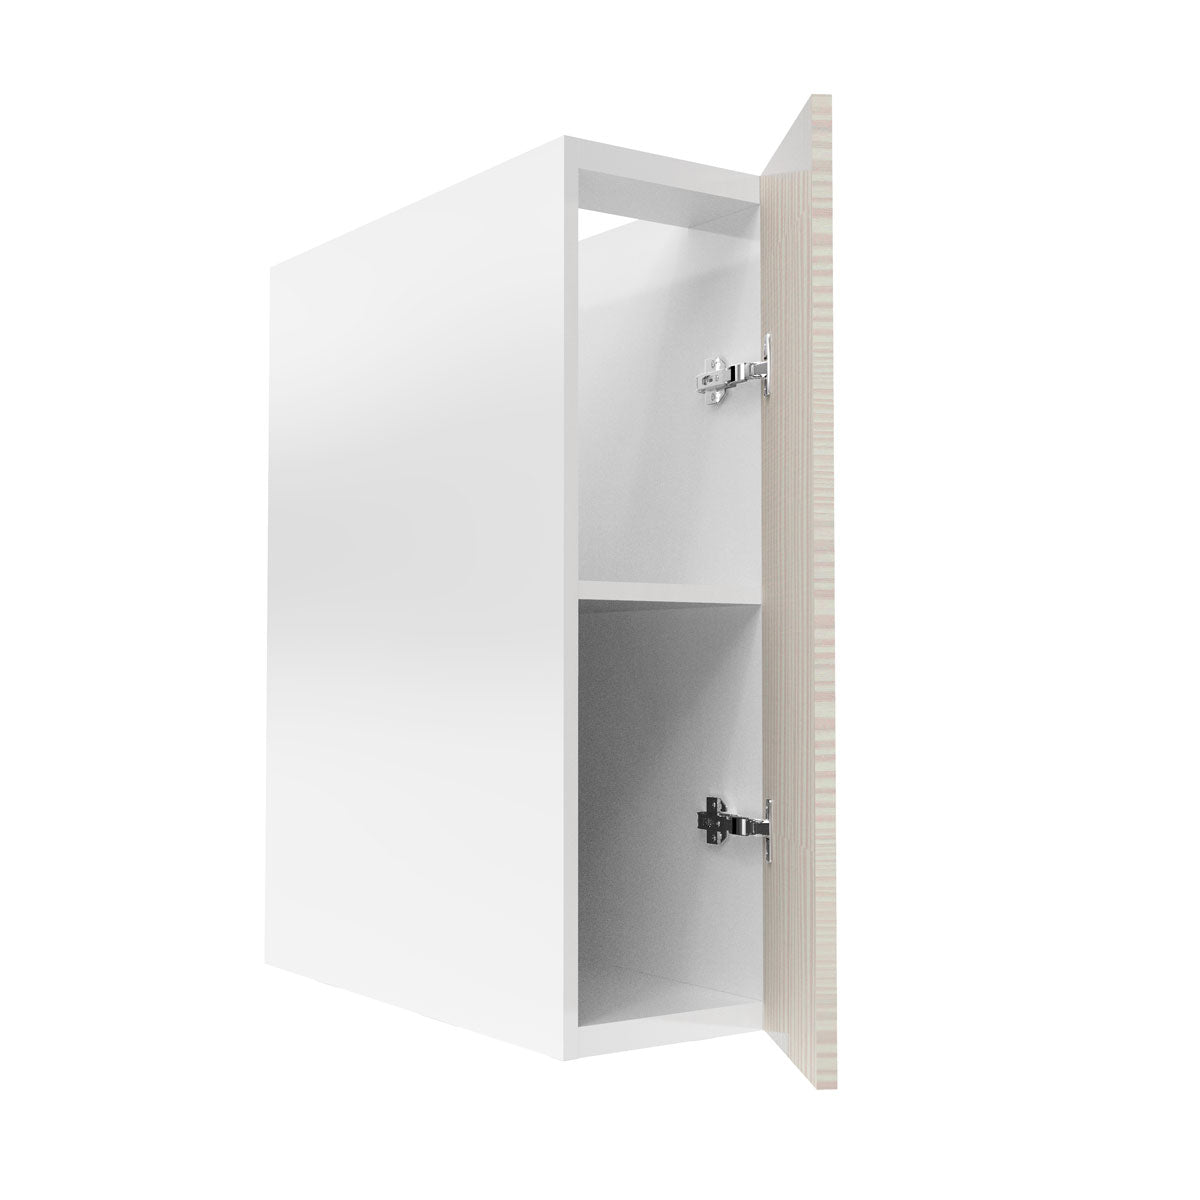 RTA - Pale Pine - Full Height Single Door Base Cabinets | 9"W x 34.5"H x 24"D